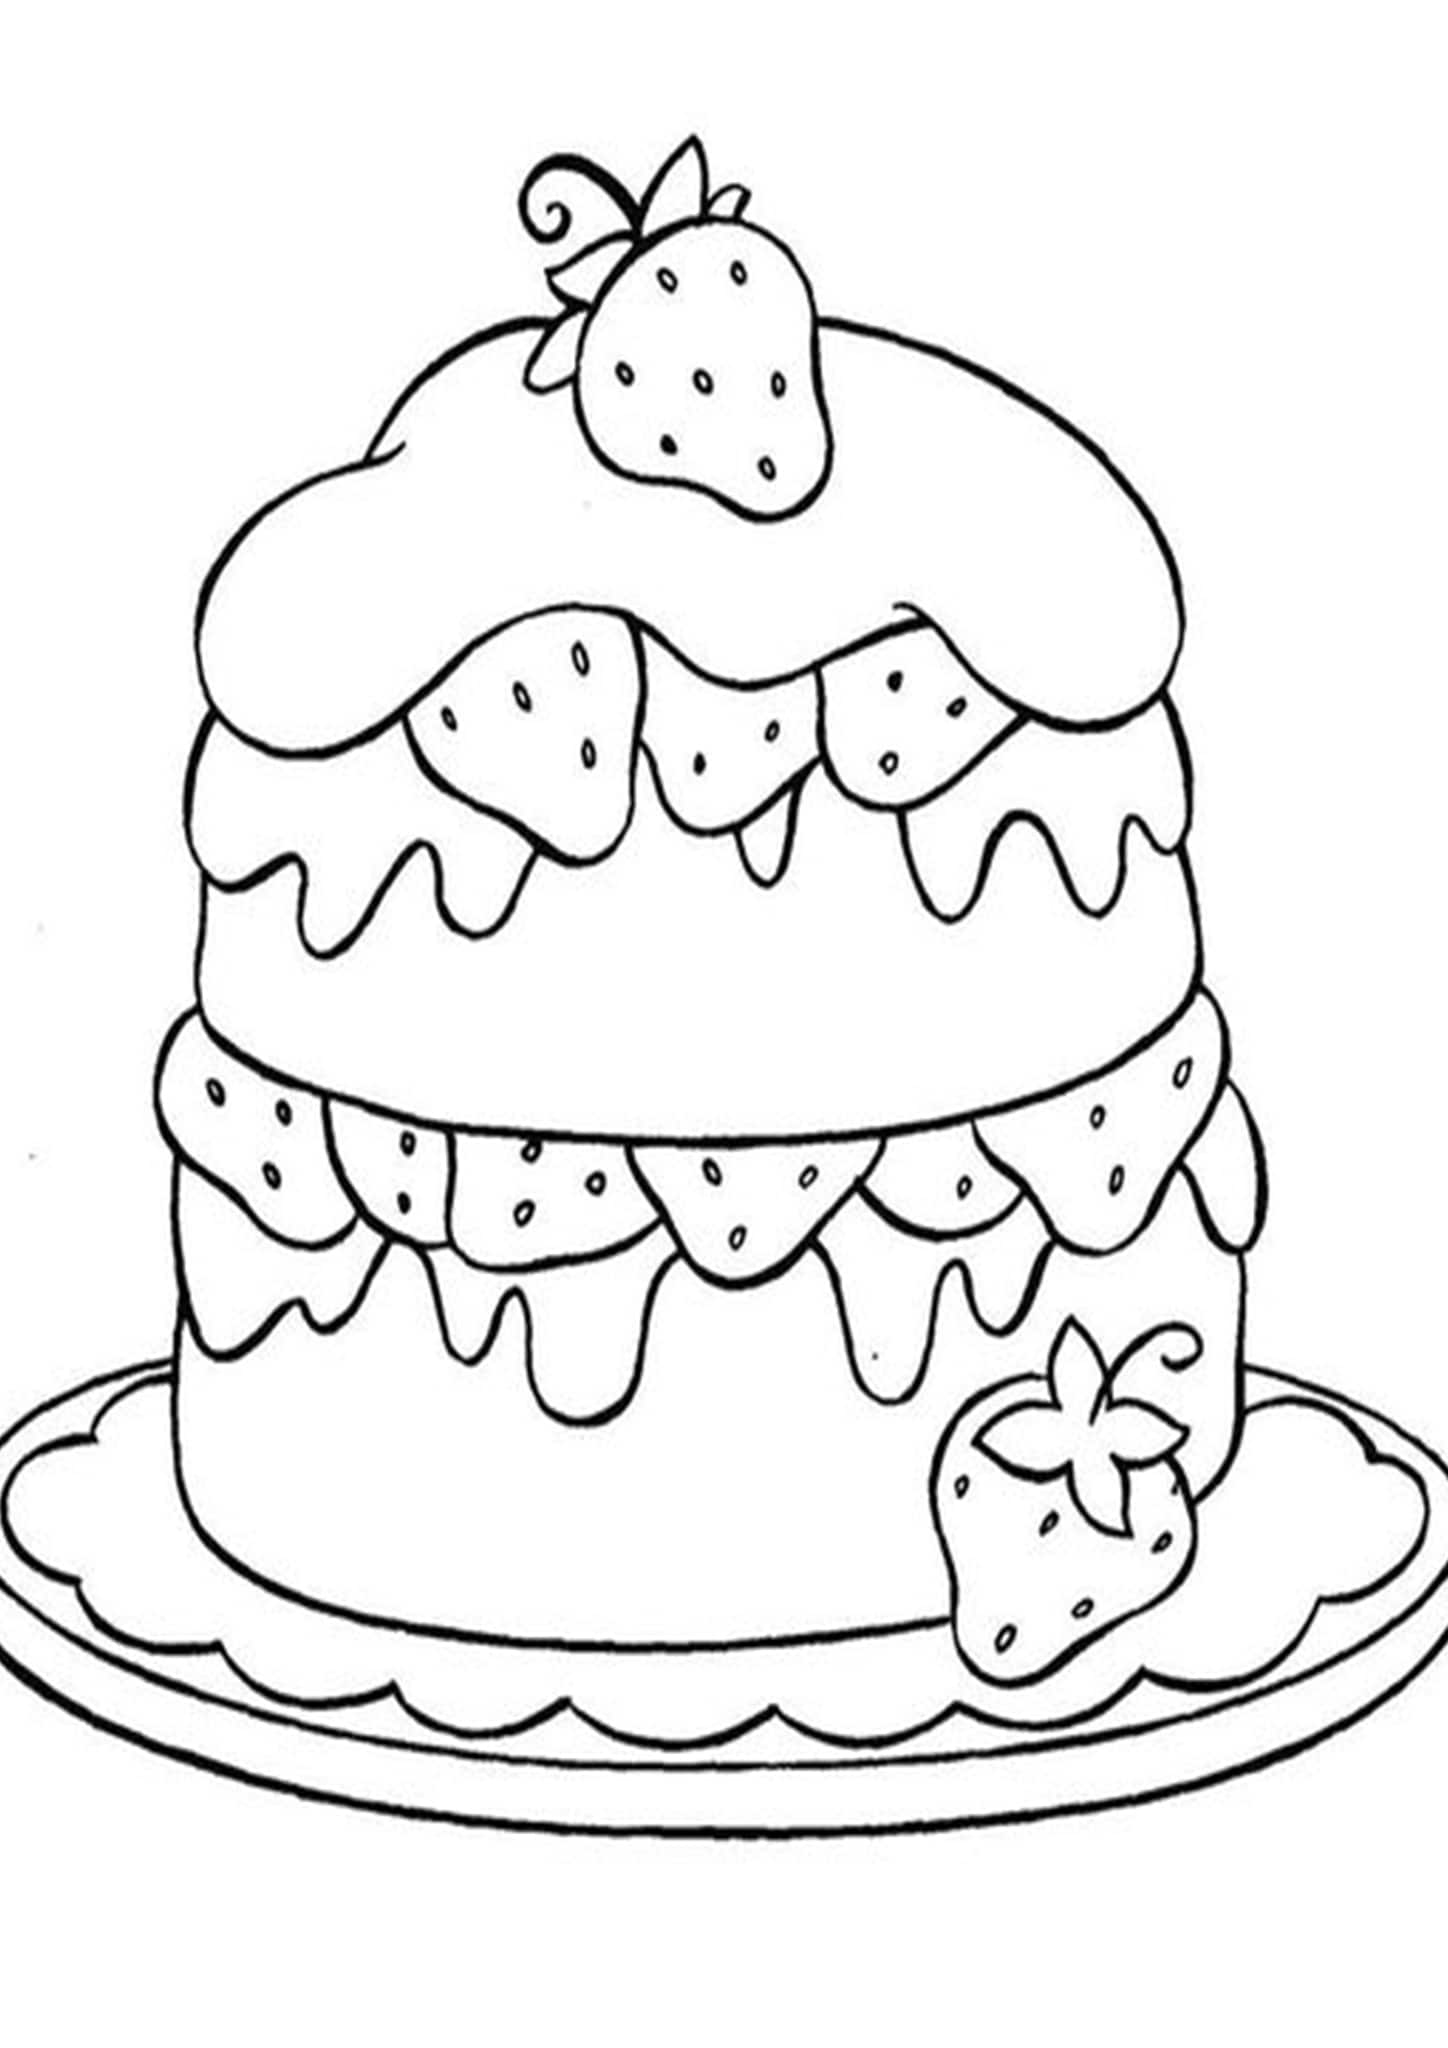 free-easy-to-print-cake-coloring-pages-tulamama